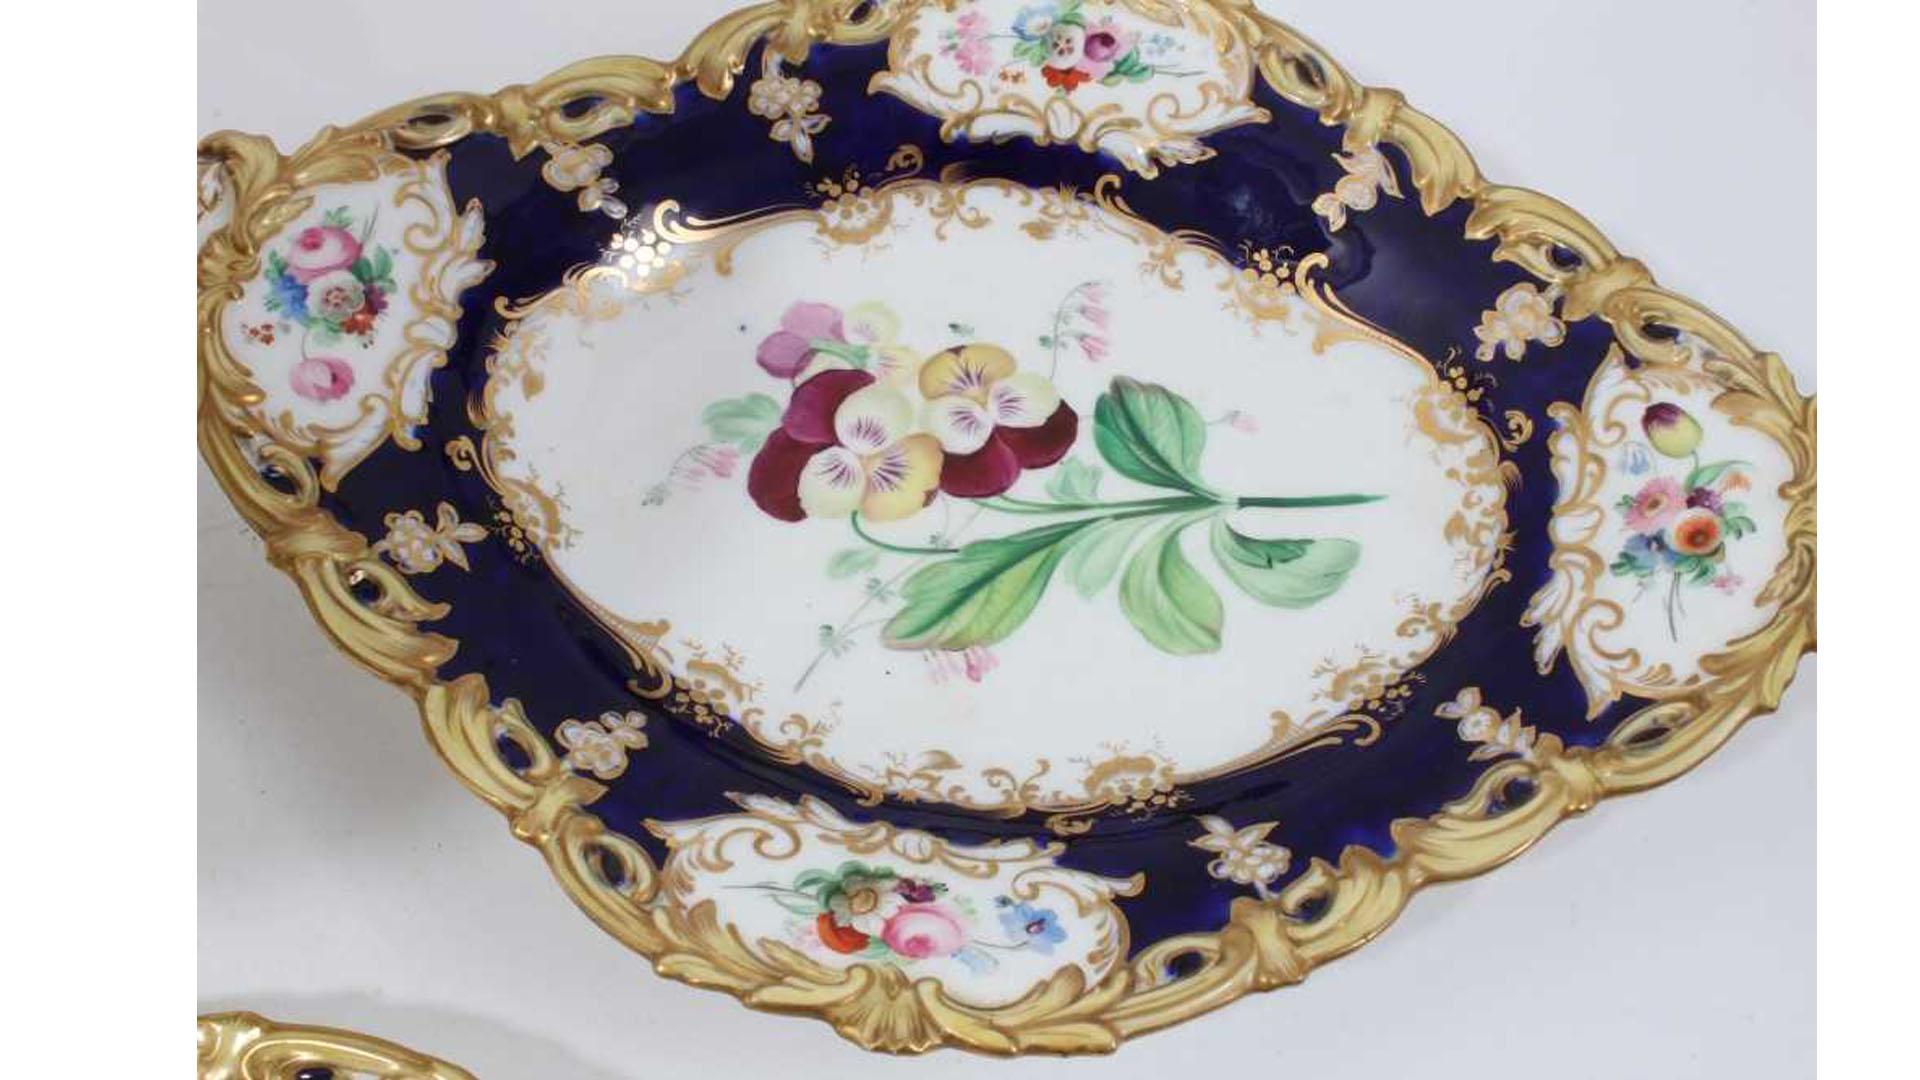 English Botanical Coalport Cobalt Blue Dessert Service by Stephen Lawrence  In Excellent Condition For Sale In London, GB